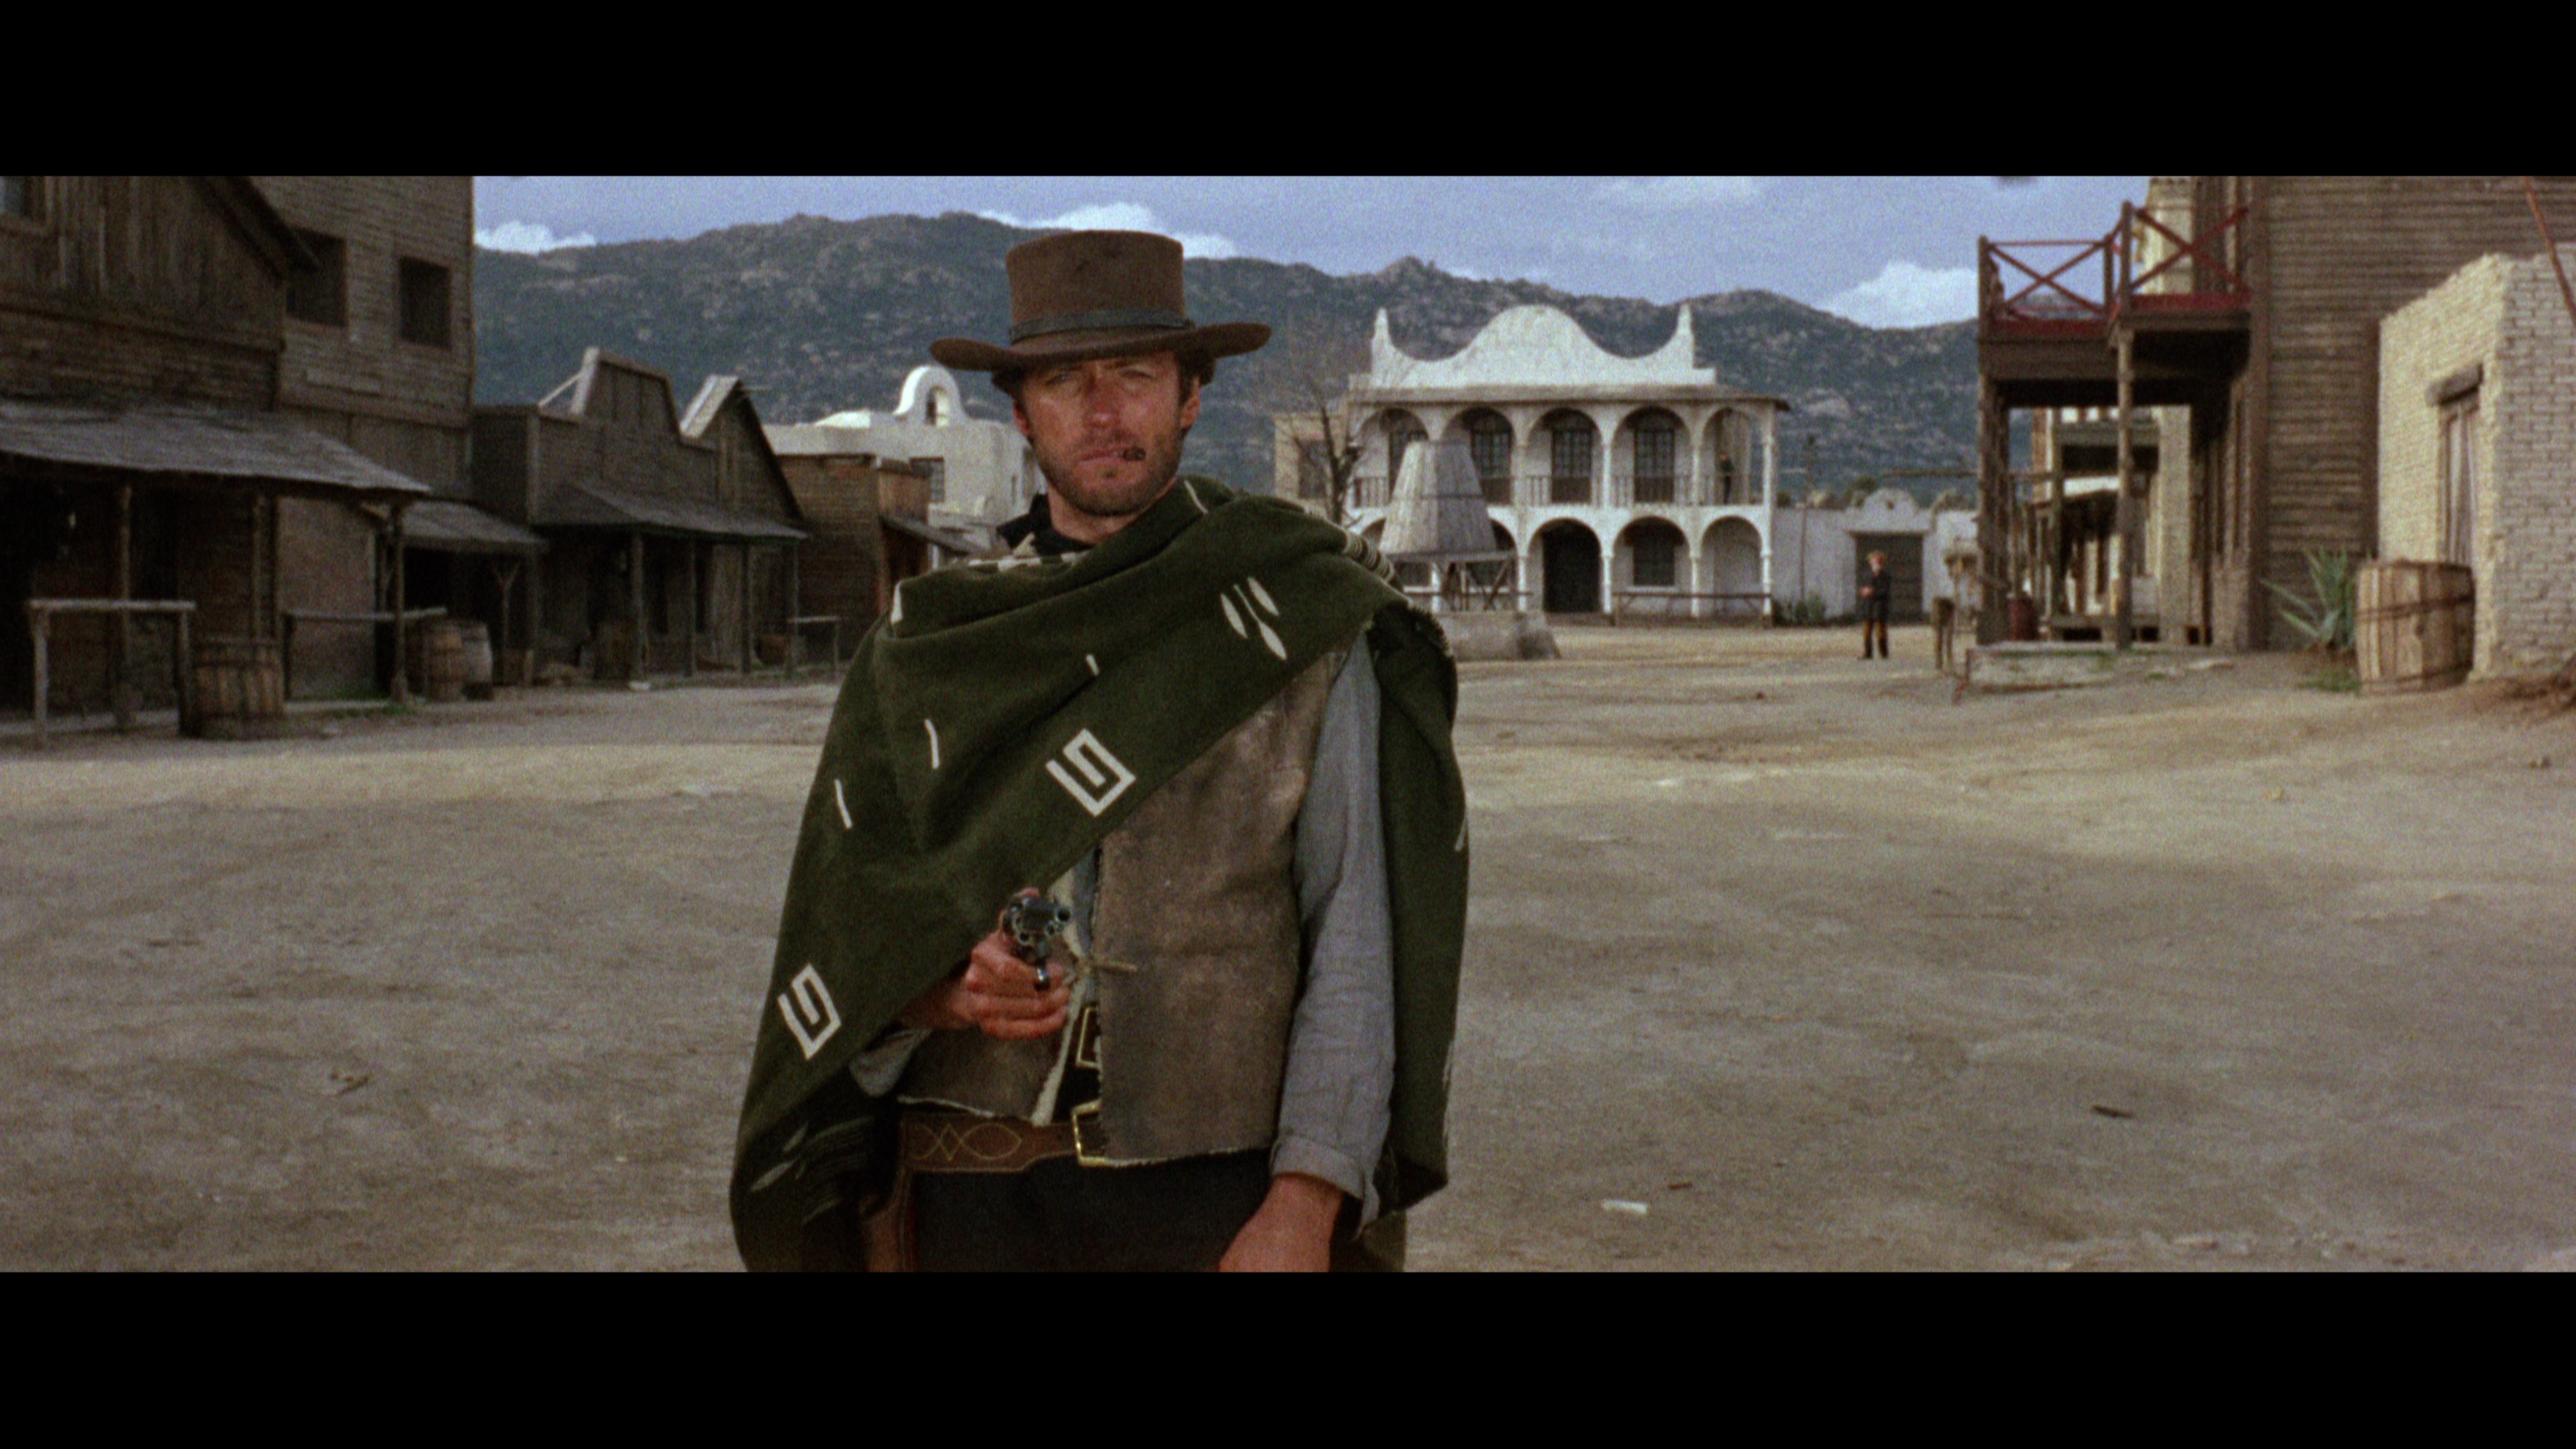 a-fistful-of-dollars-eastwood-klsc-4k-ultrahd-bluray-review-highdef-digest-1.png